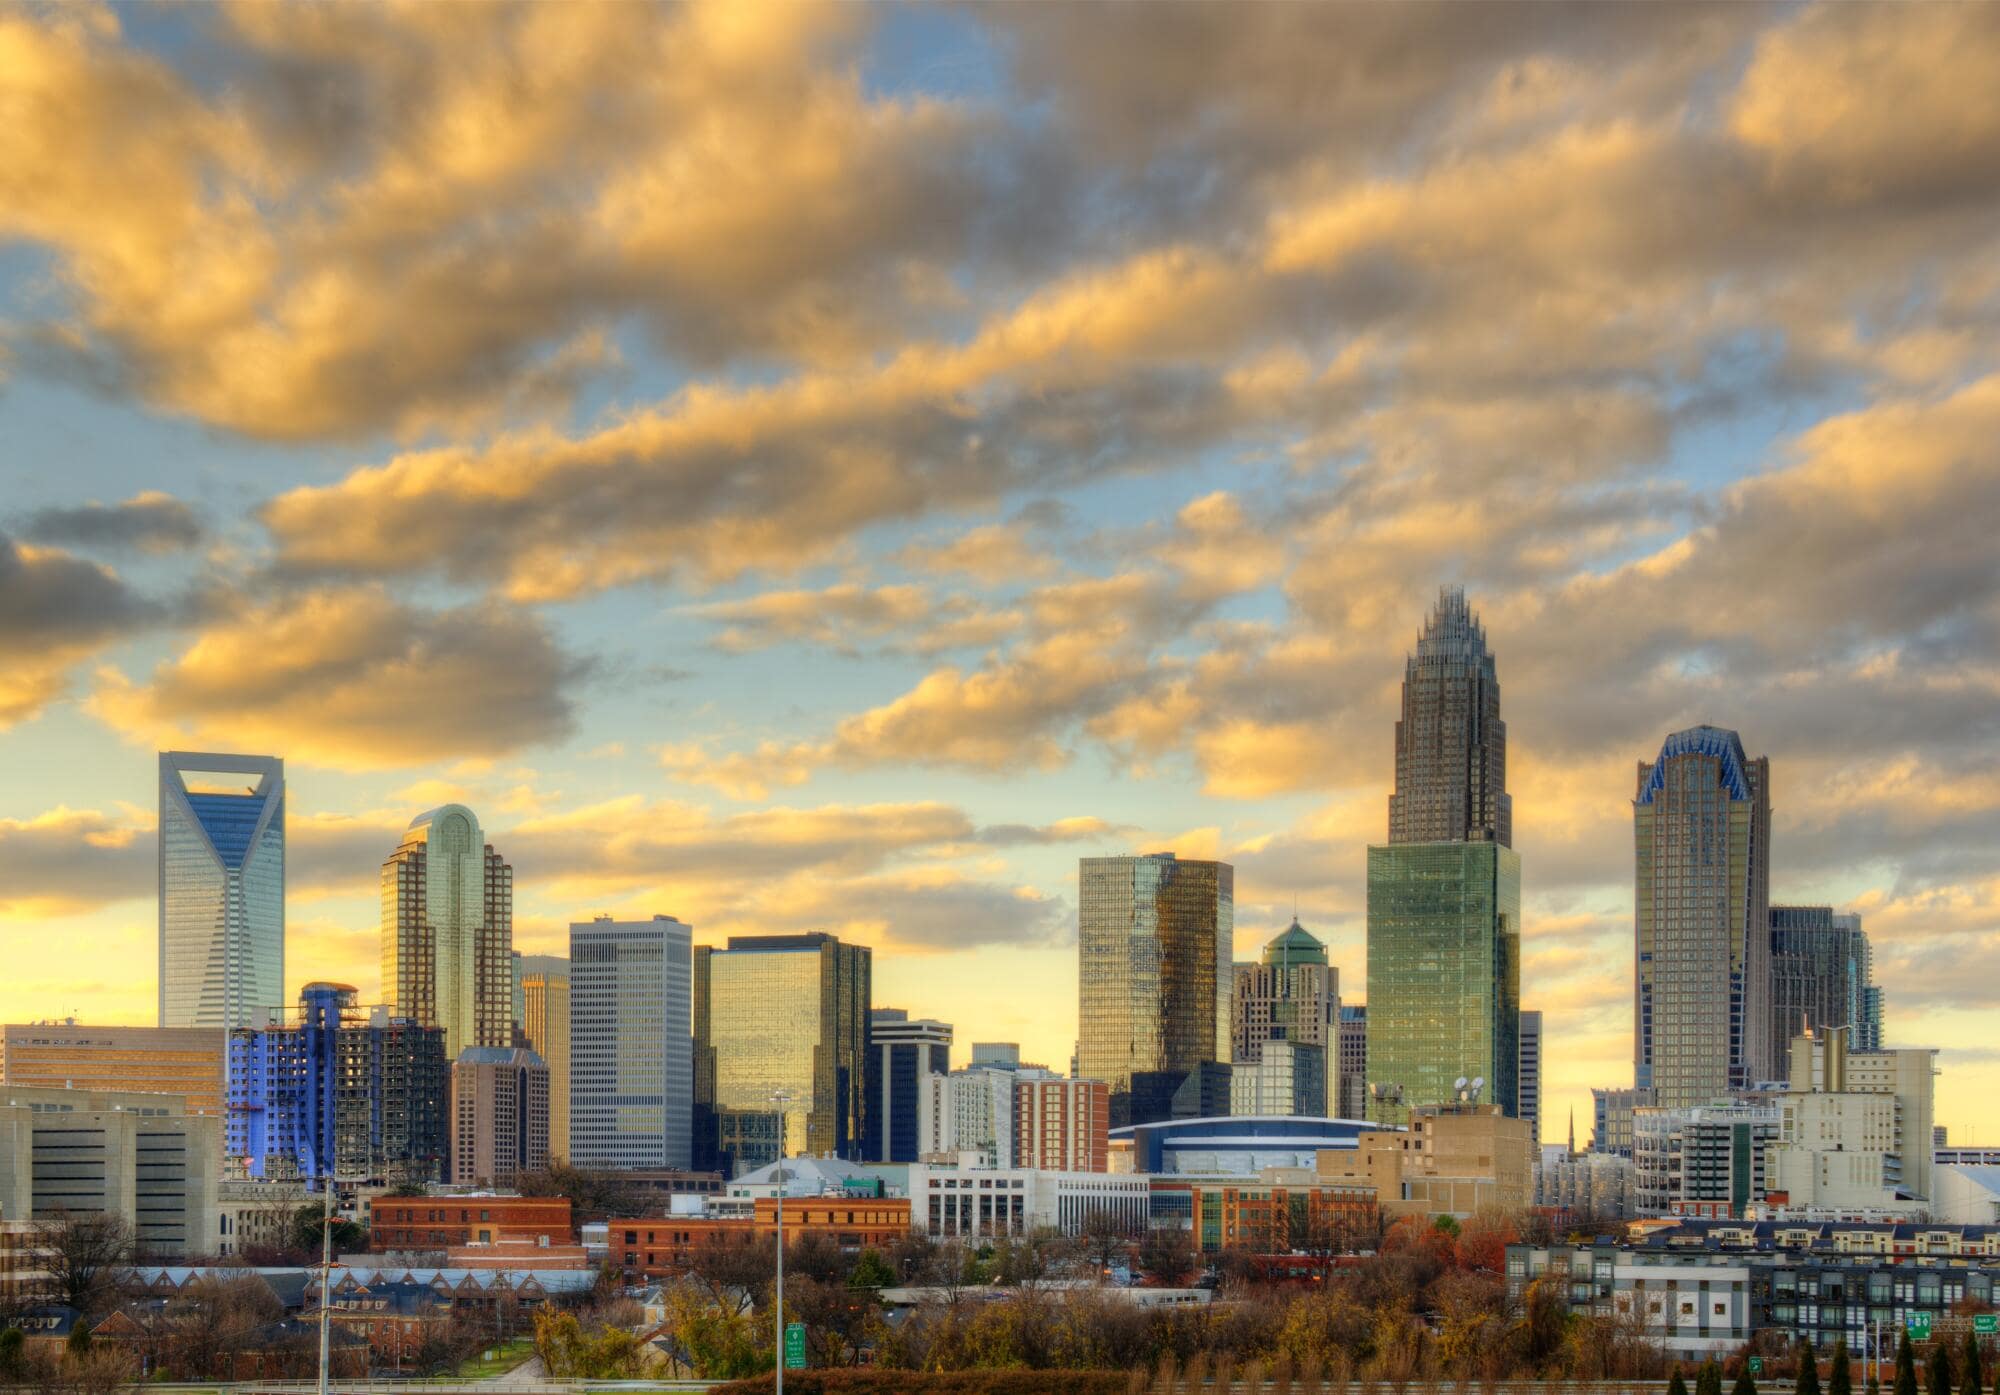 ow to Start Real Estate Investing in Charlotte, North Carolina